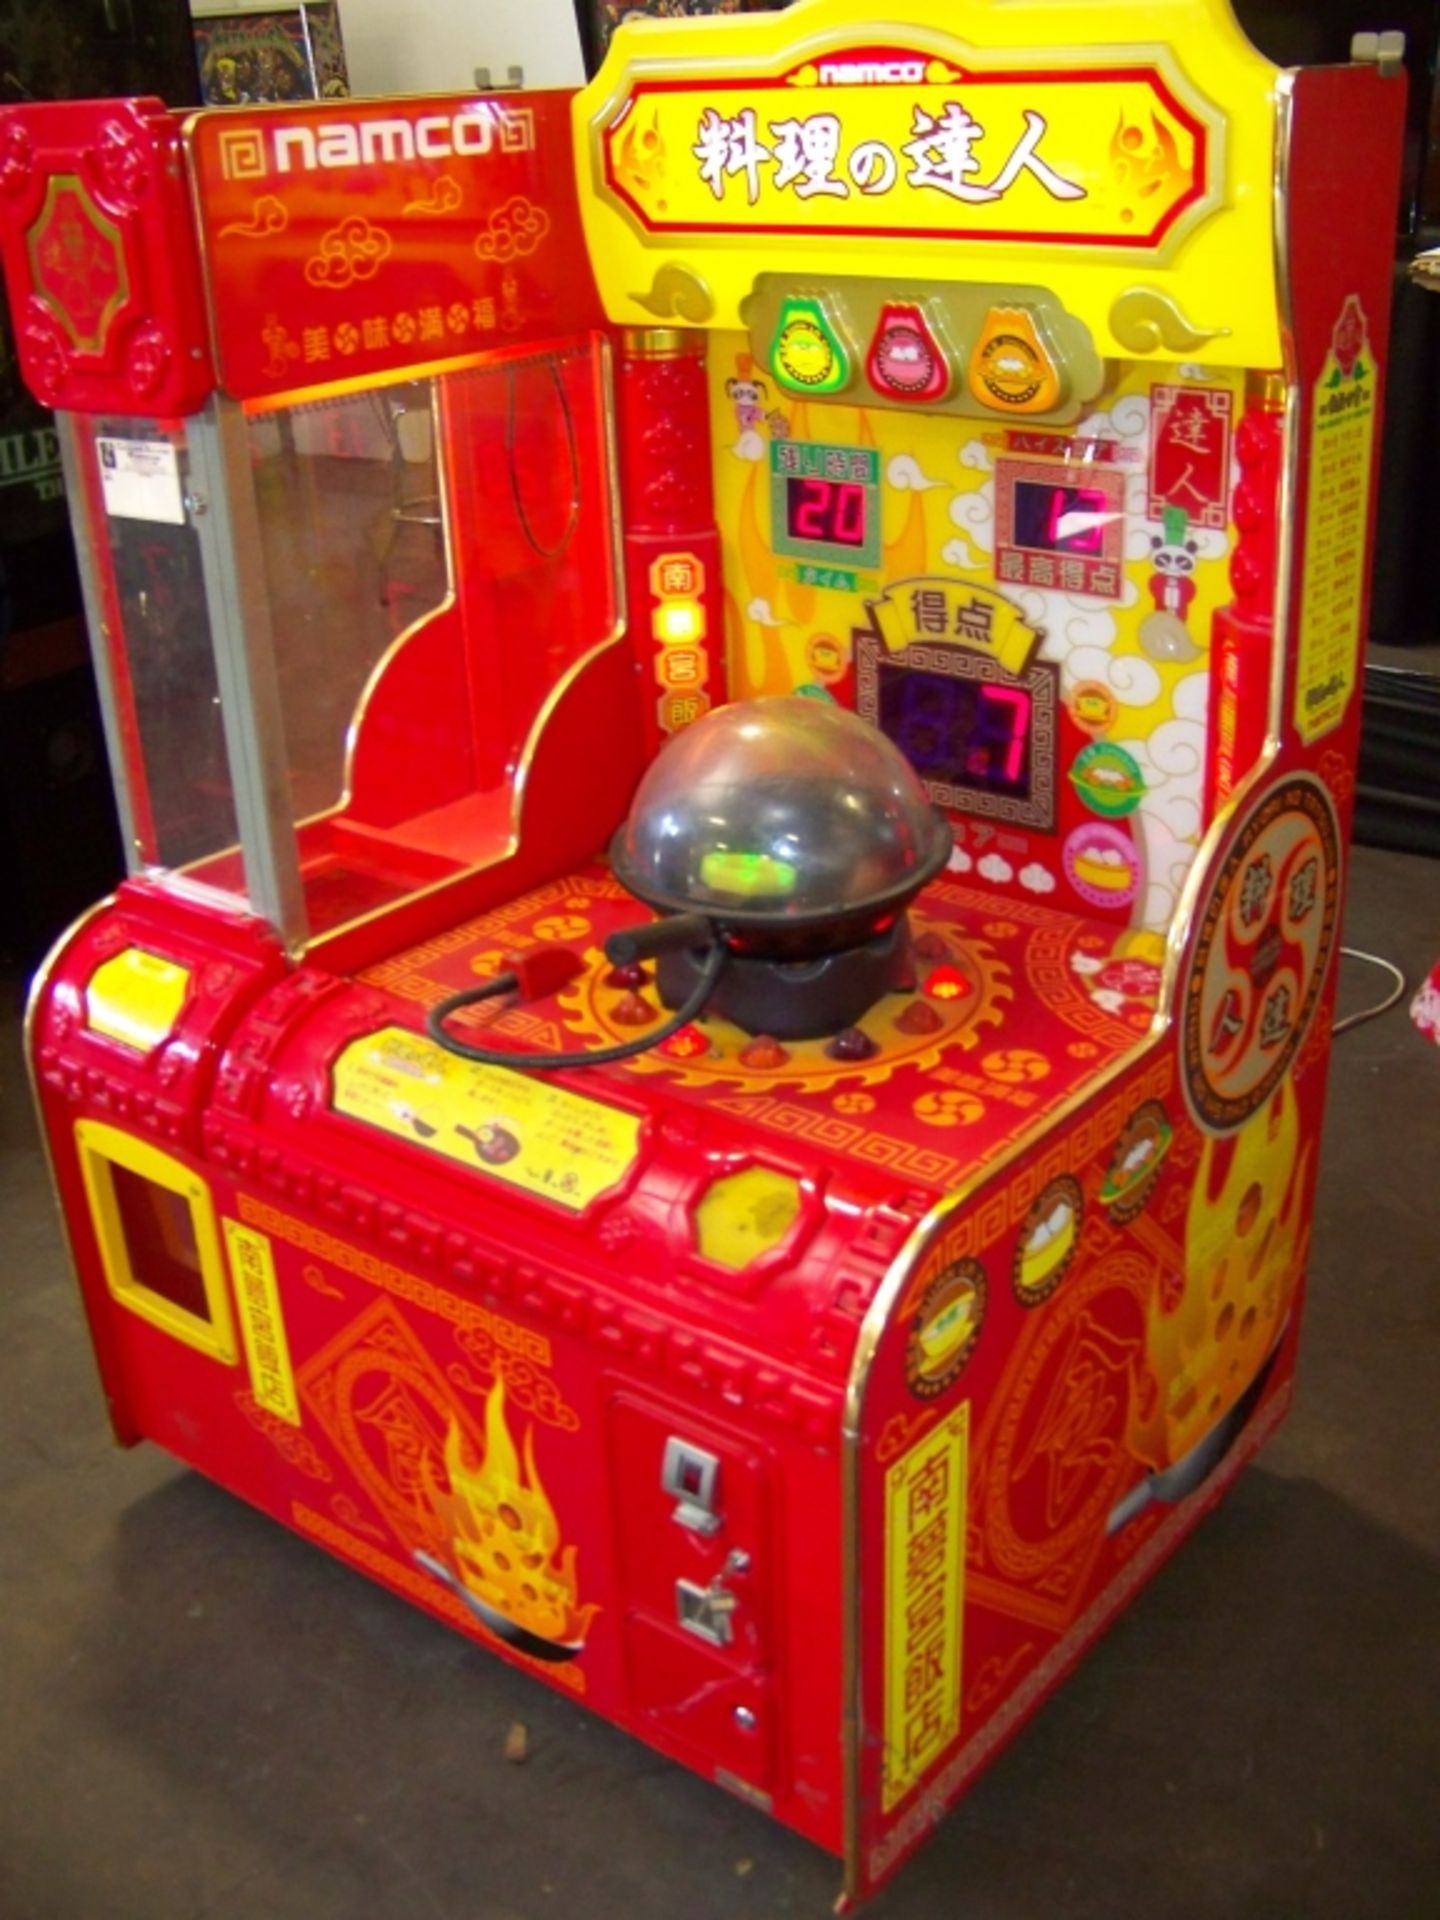 MASTER CHEF PRIZE REDEMPTION ARCADE GAME NAMCO Item is in used condition. Evidence of wear and - Image 8 of 8